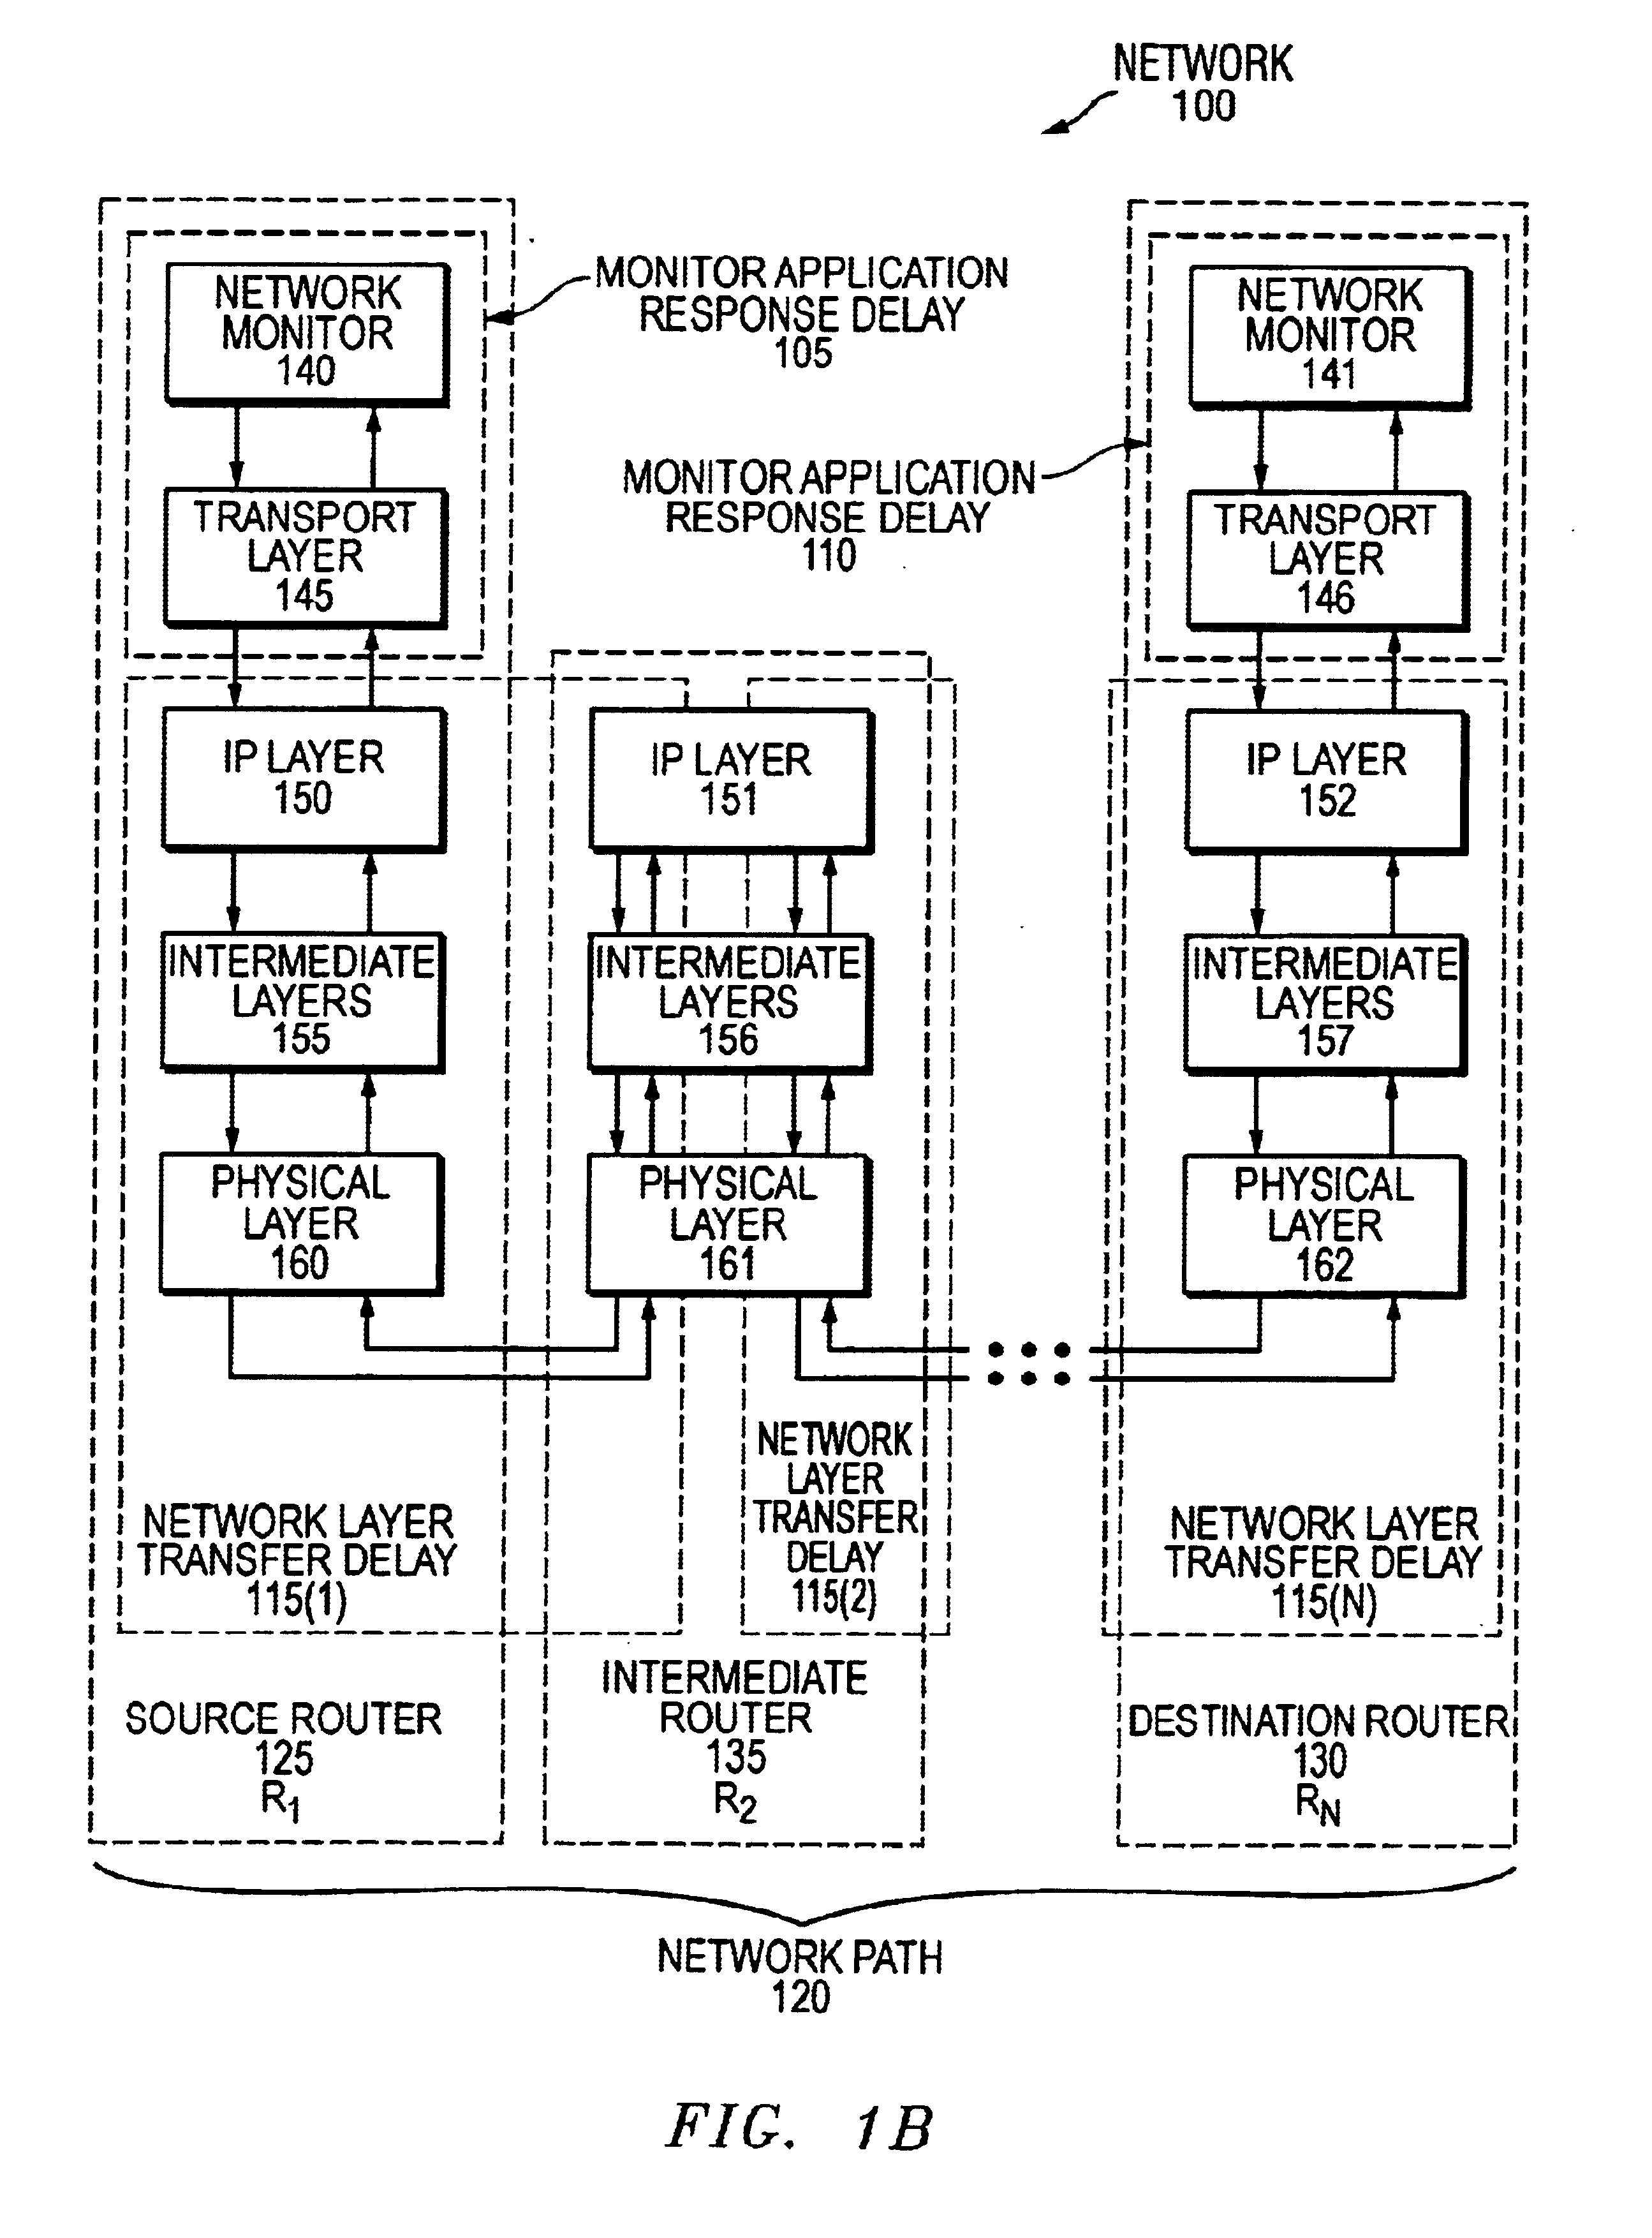 Method and apparatus for estimating delay and jitter between many network routers using measurements between a preferred set of routers